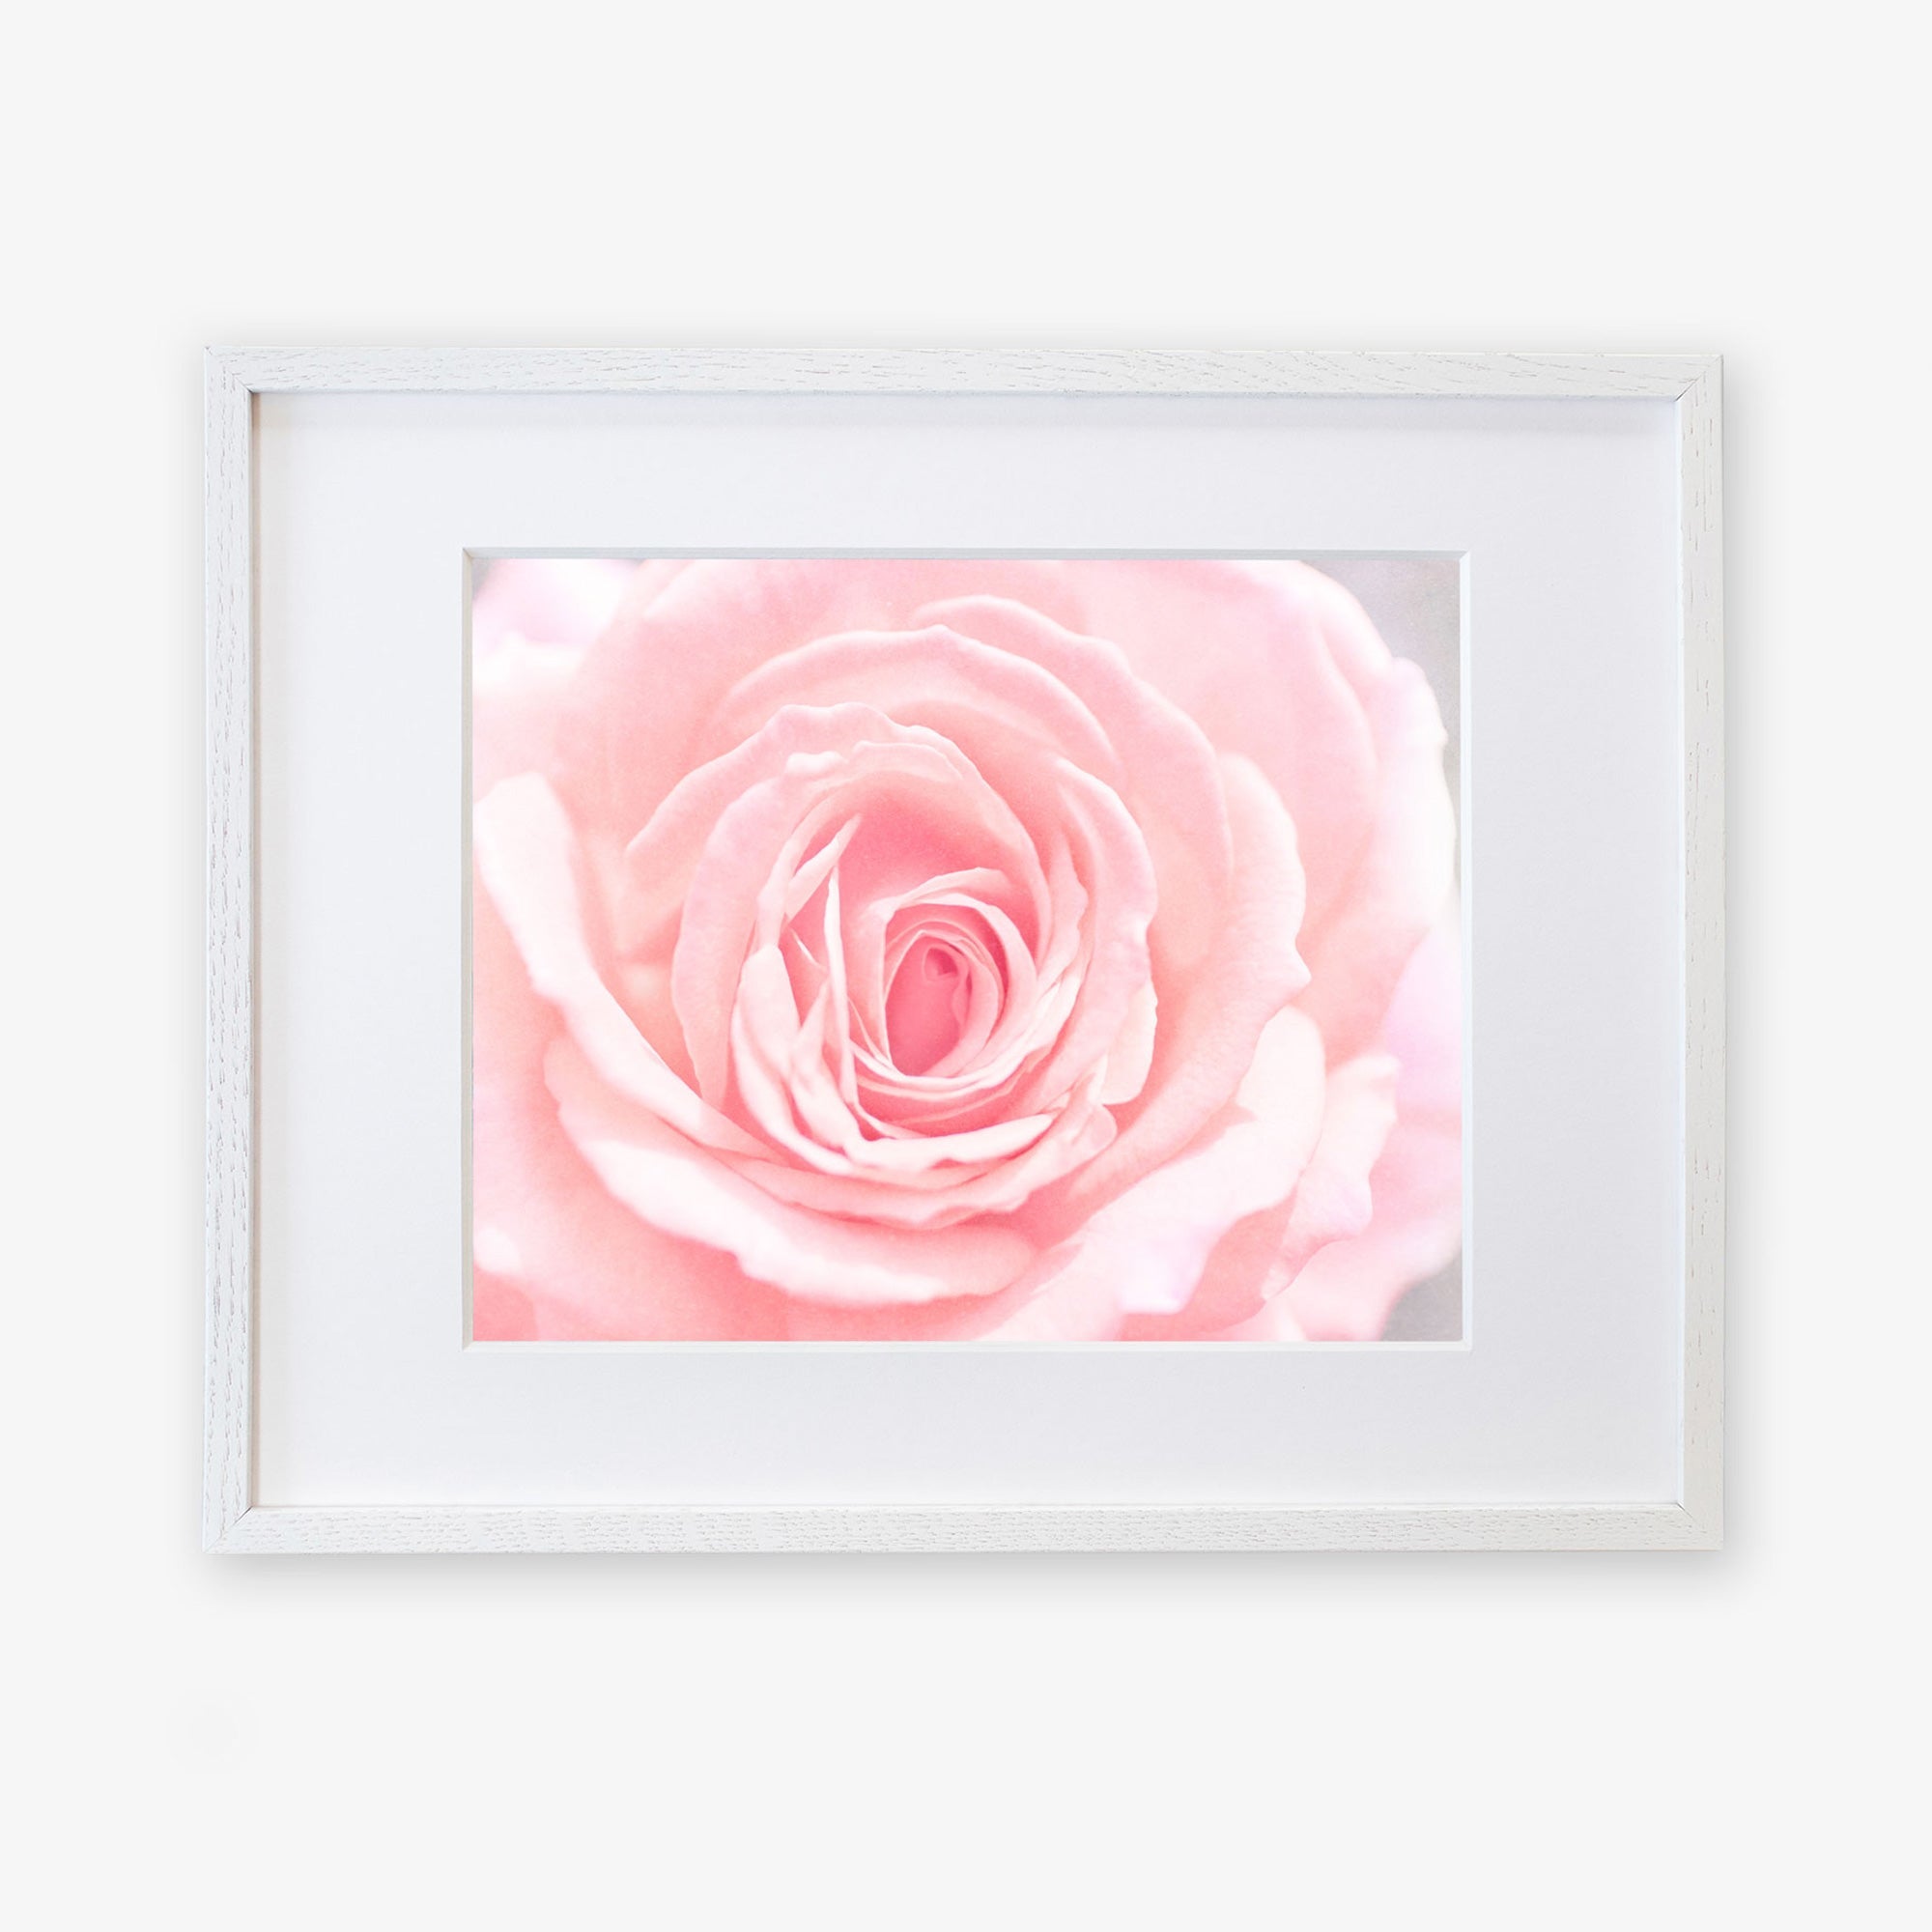 A framed Pink Rose Print, &#39;Pink and Shabby&#39; by Offley Green, displaying a delicate pink rose in bloom, centered and prominently displayed against a soft white background, on archival photographic paper in a simple white frame.